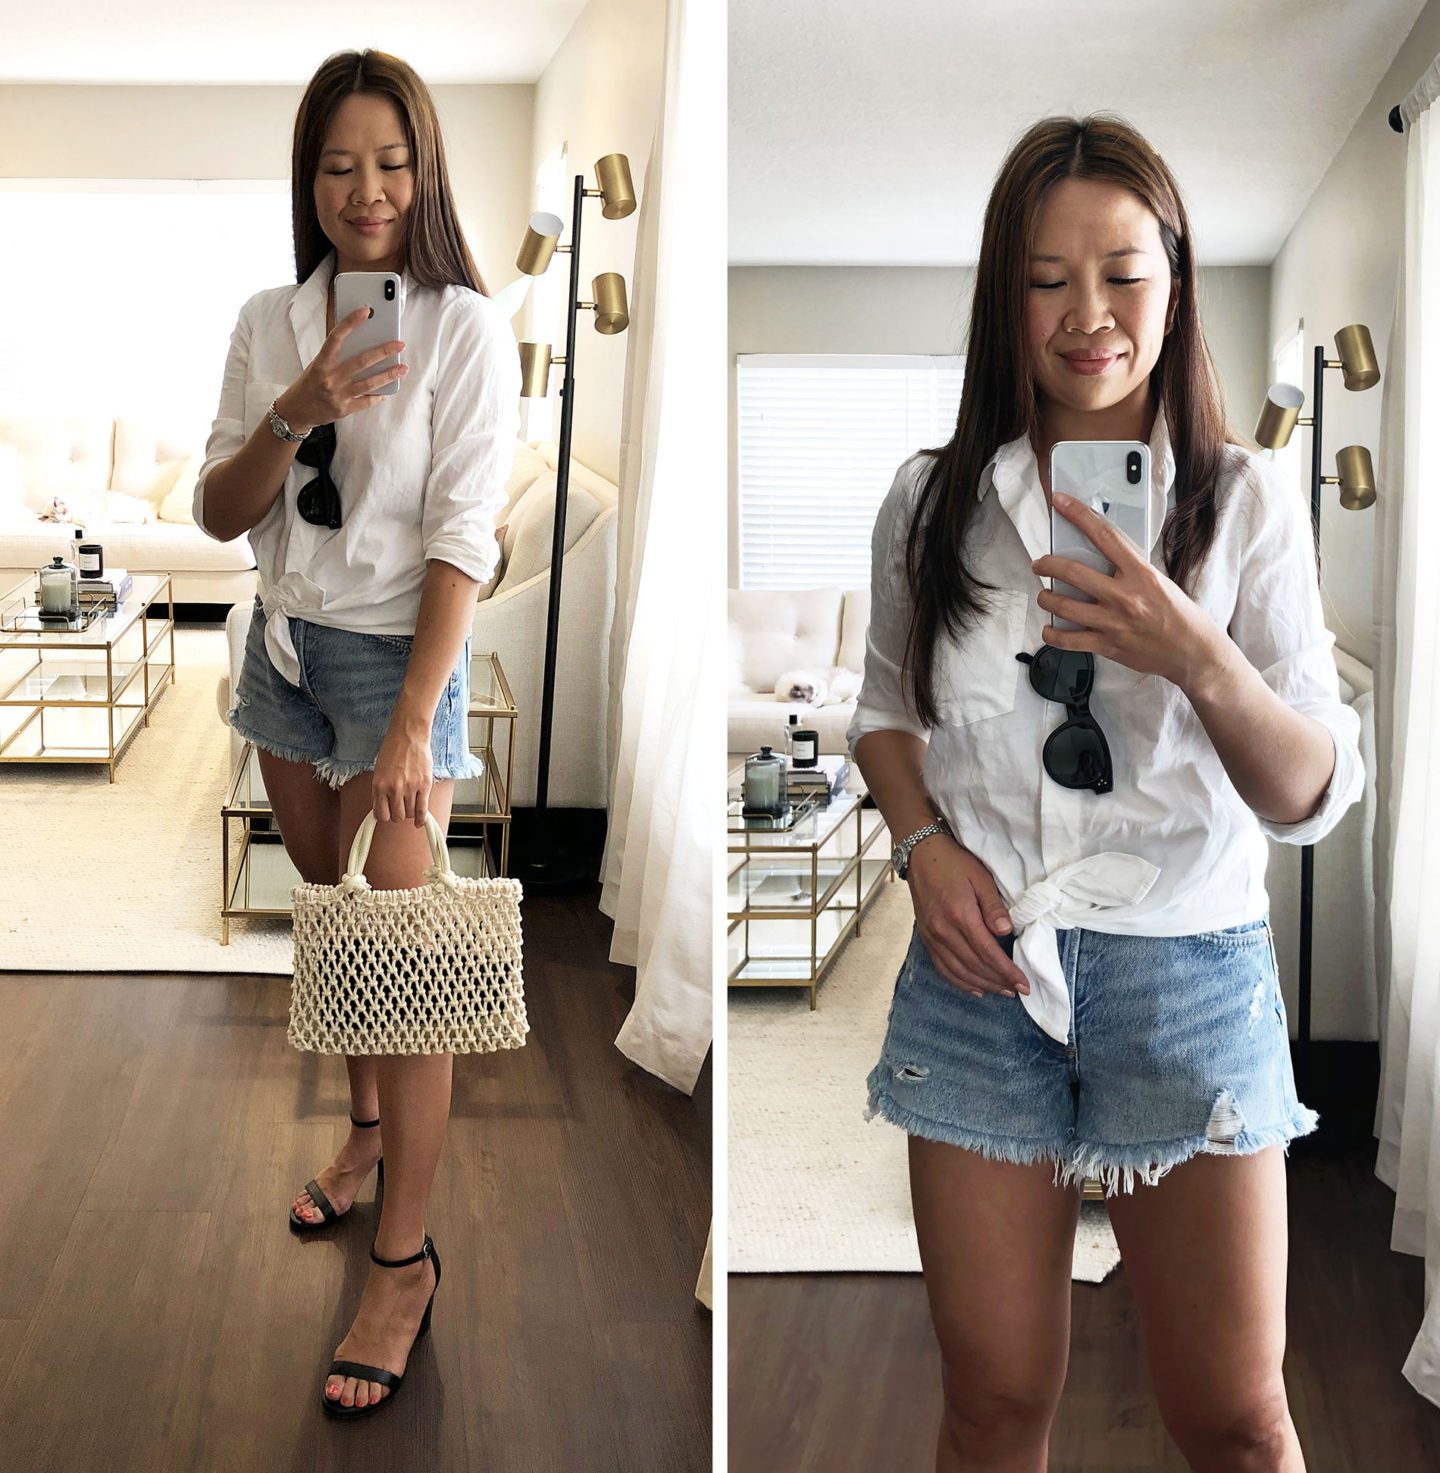 OOTD Madewell Tie Front Top, AGolde Parker Shorts in Swapmeet, Clare V Petite Sandy, Stuart Weitzman Nearlynude Black